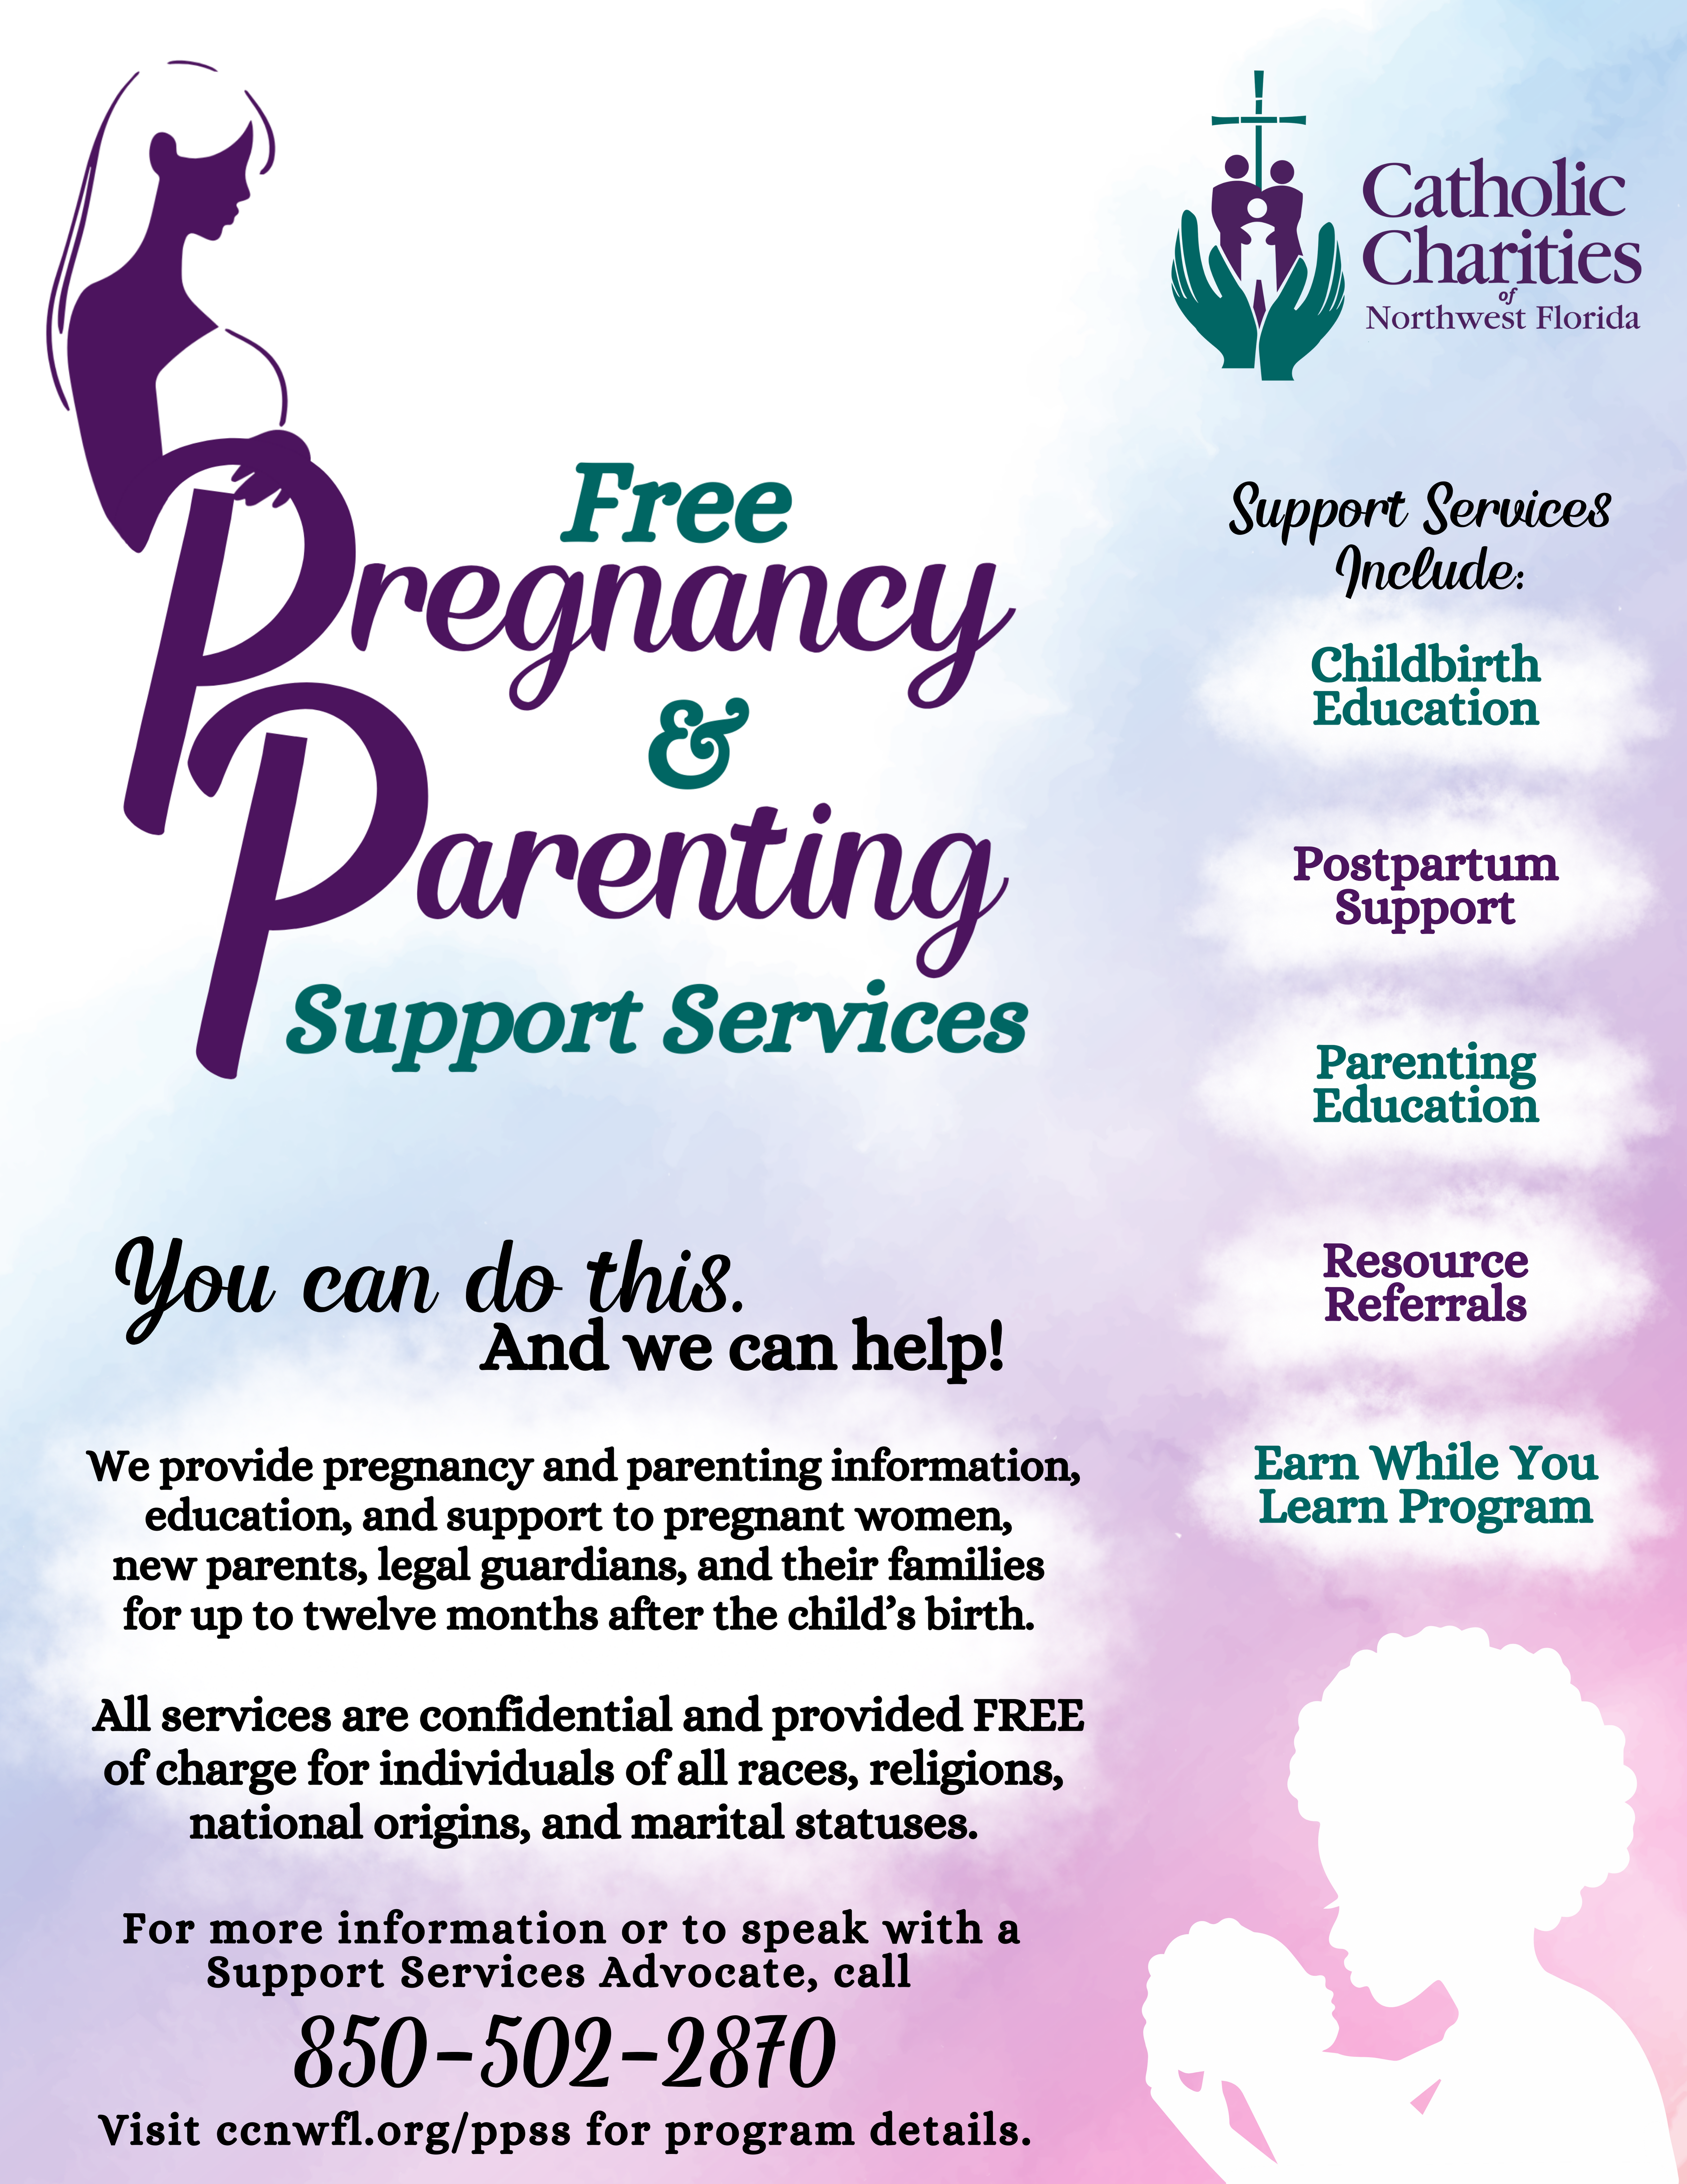 Pregnancy & Parenting Support Services Flyer